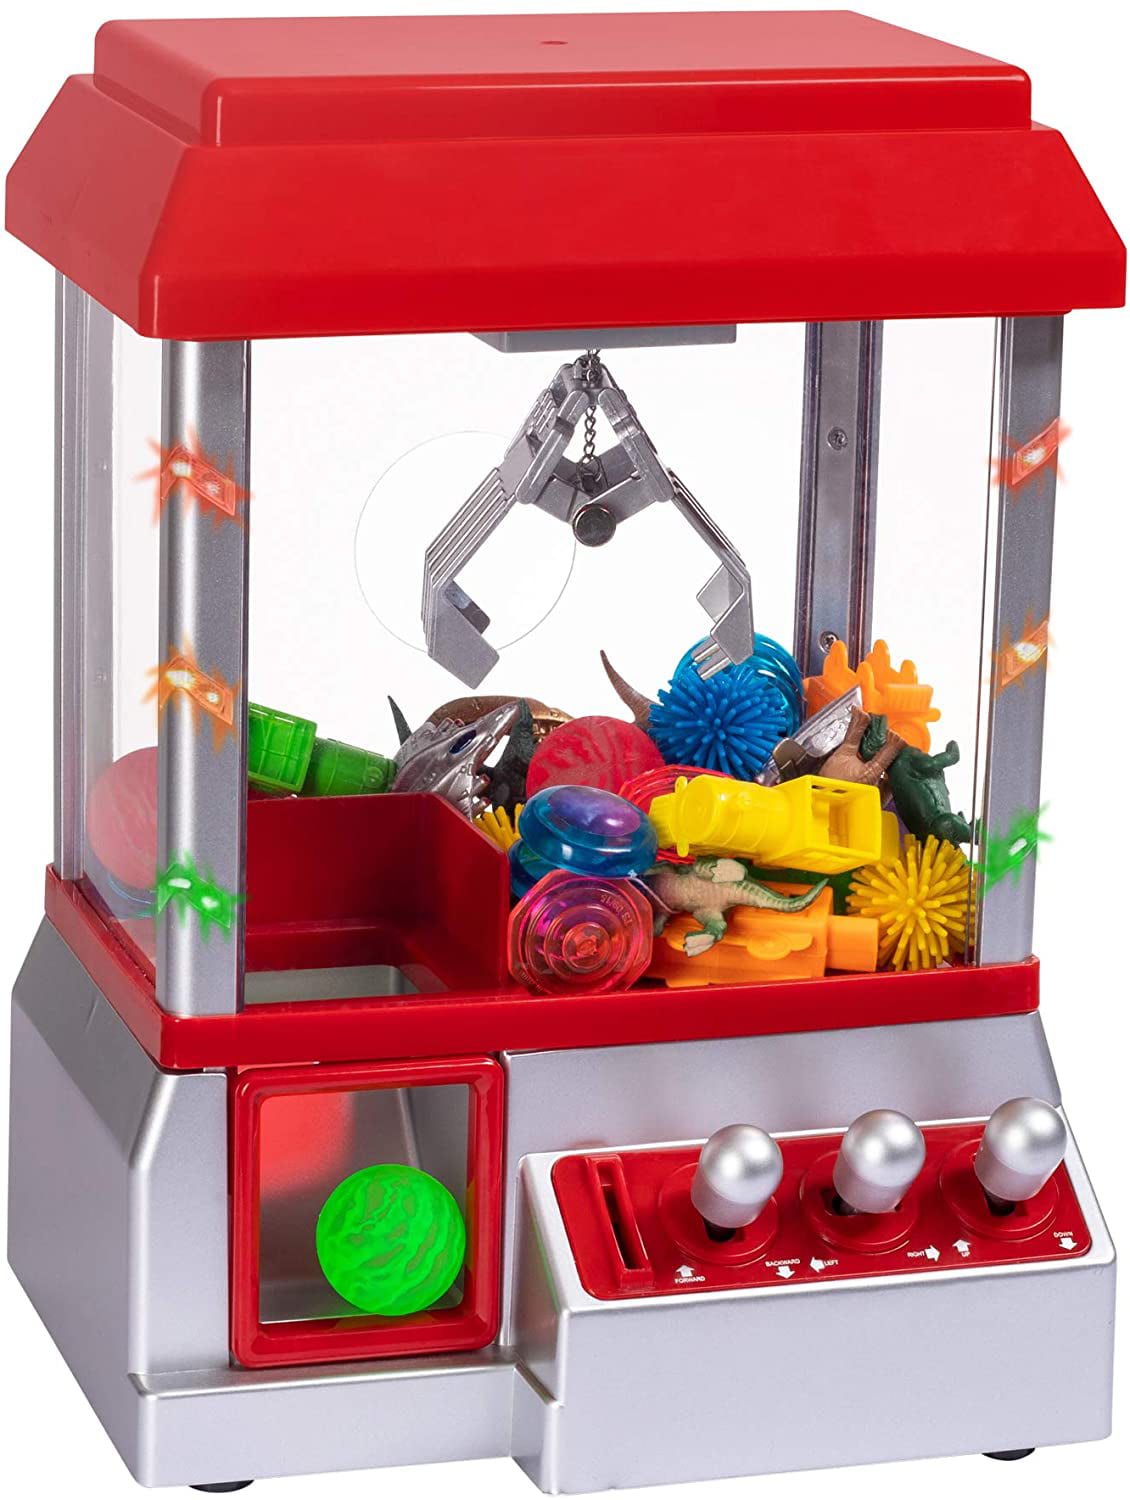 Home Electronic Claw Toy Grabber Classic Arcade Carnival Game w/ Lights & Sound 